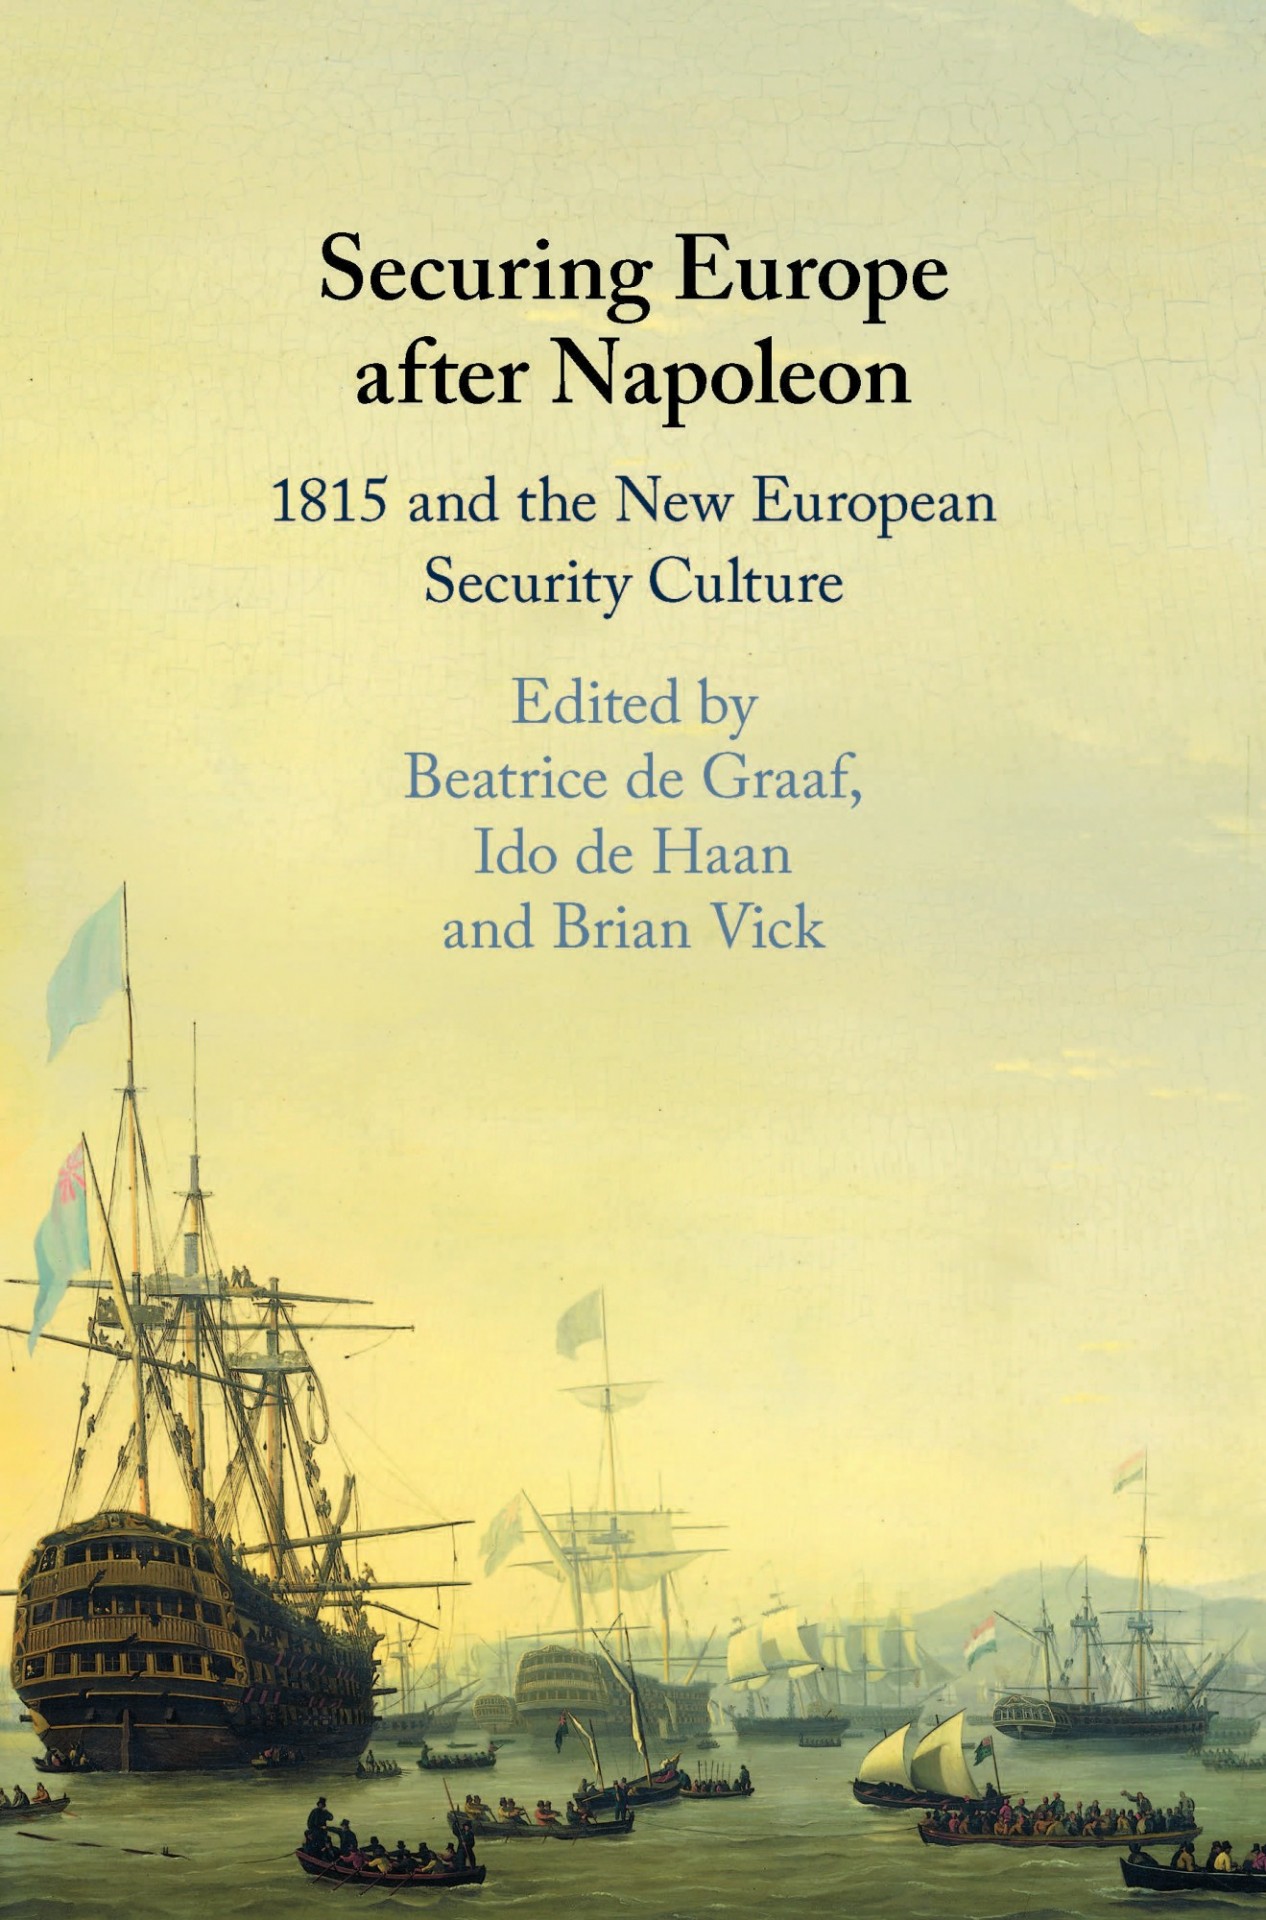 Book cover of "Securing Europe After Napoleon"